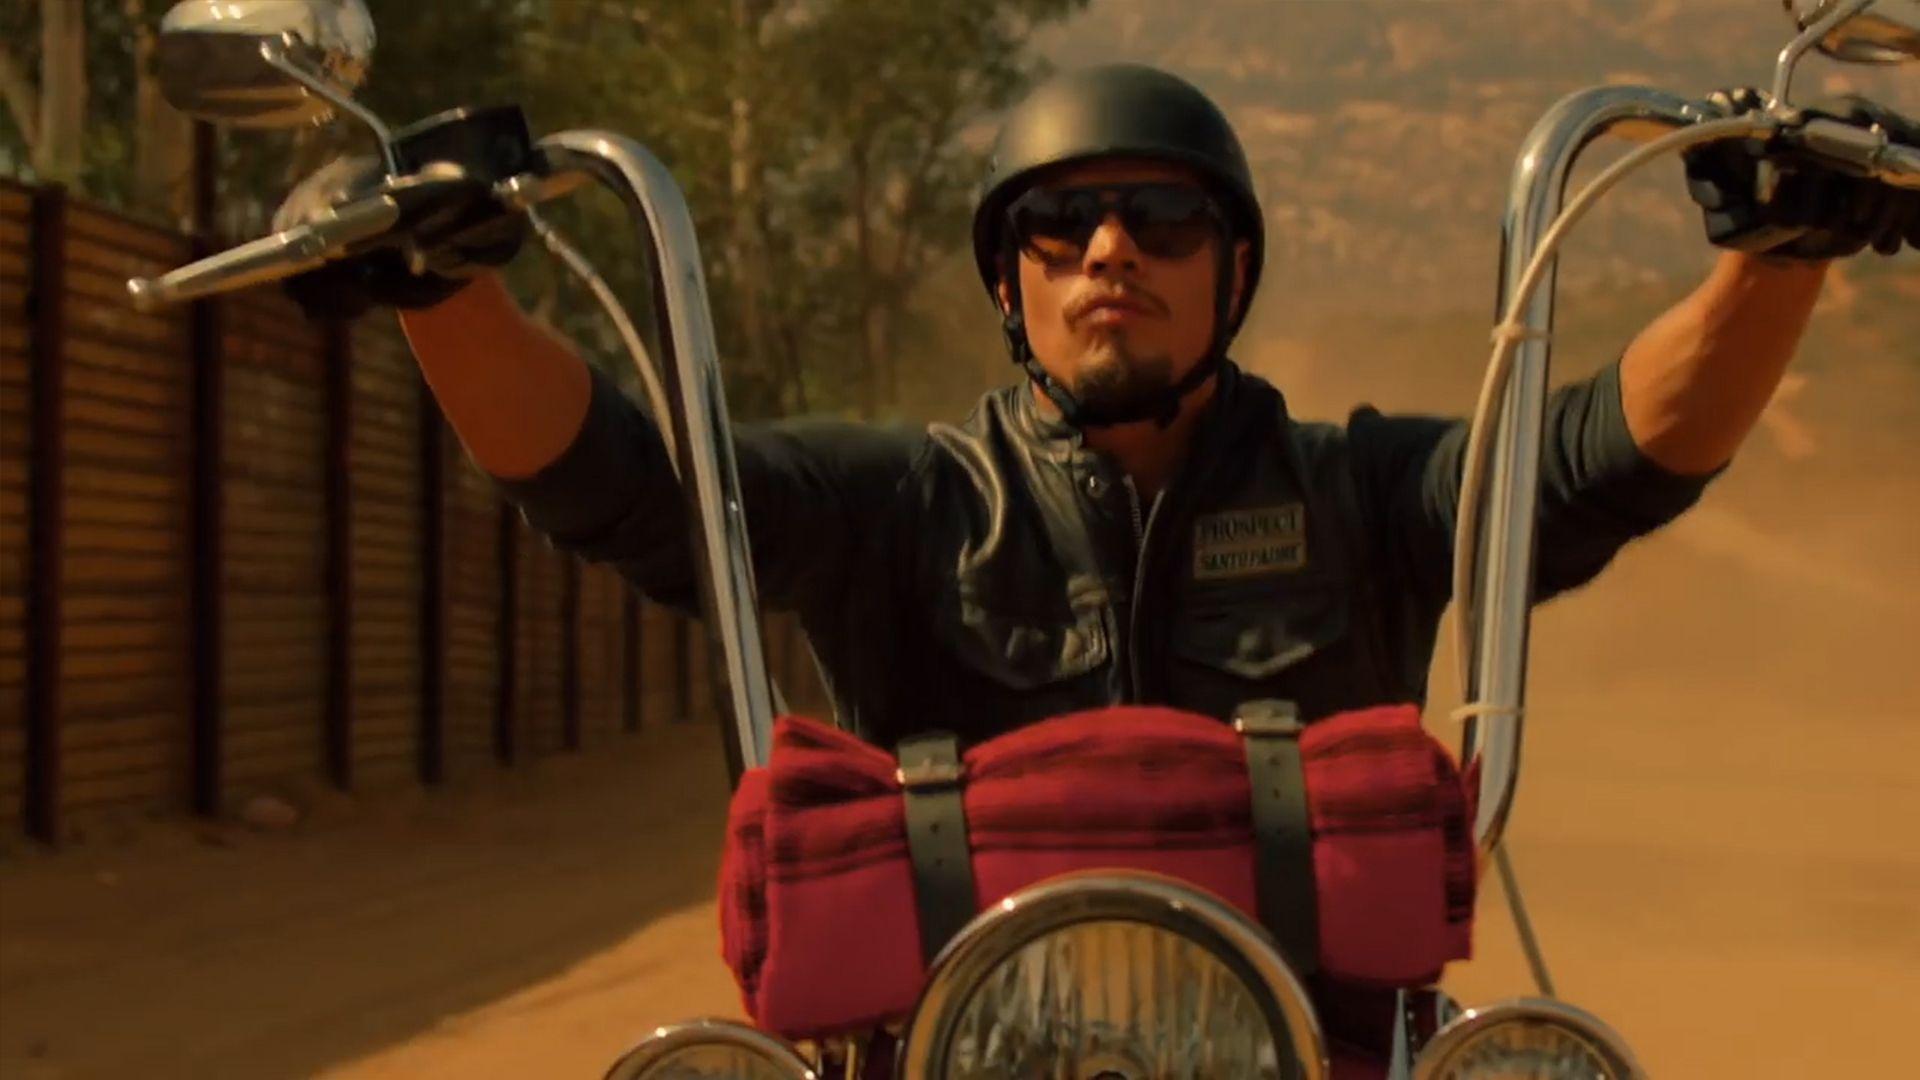 Mayans M.C.' Ranks As Top New Cable Series Premiere In Live+